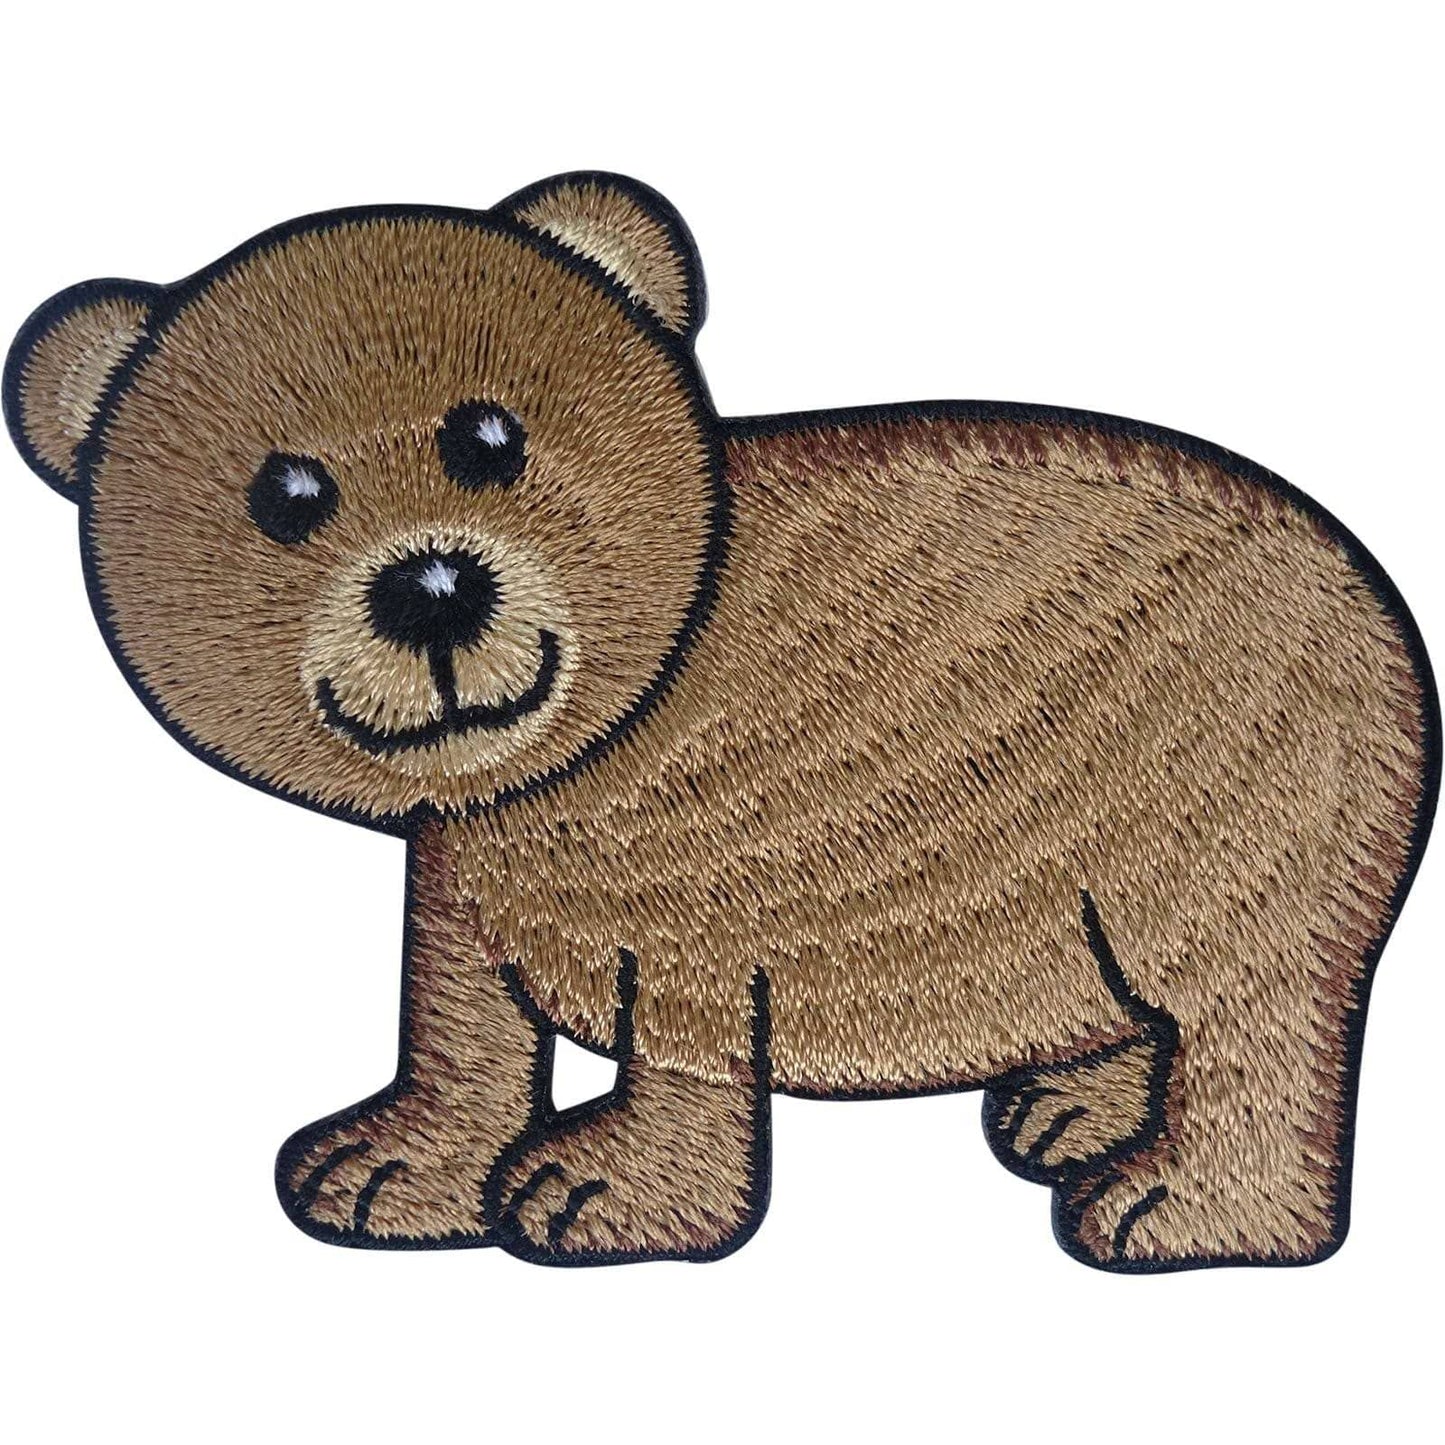 Bear Patch Iron Sew On Clothes T Shirt Jacket Denim Embroidered Badge Applique